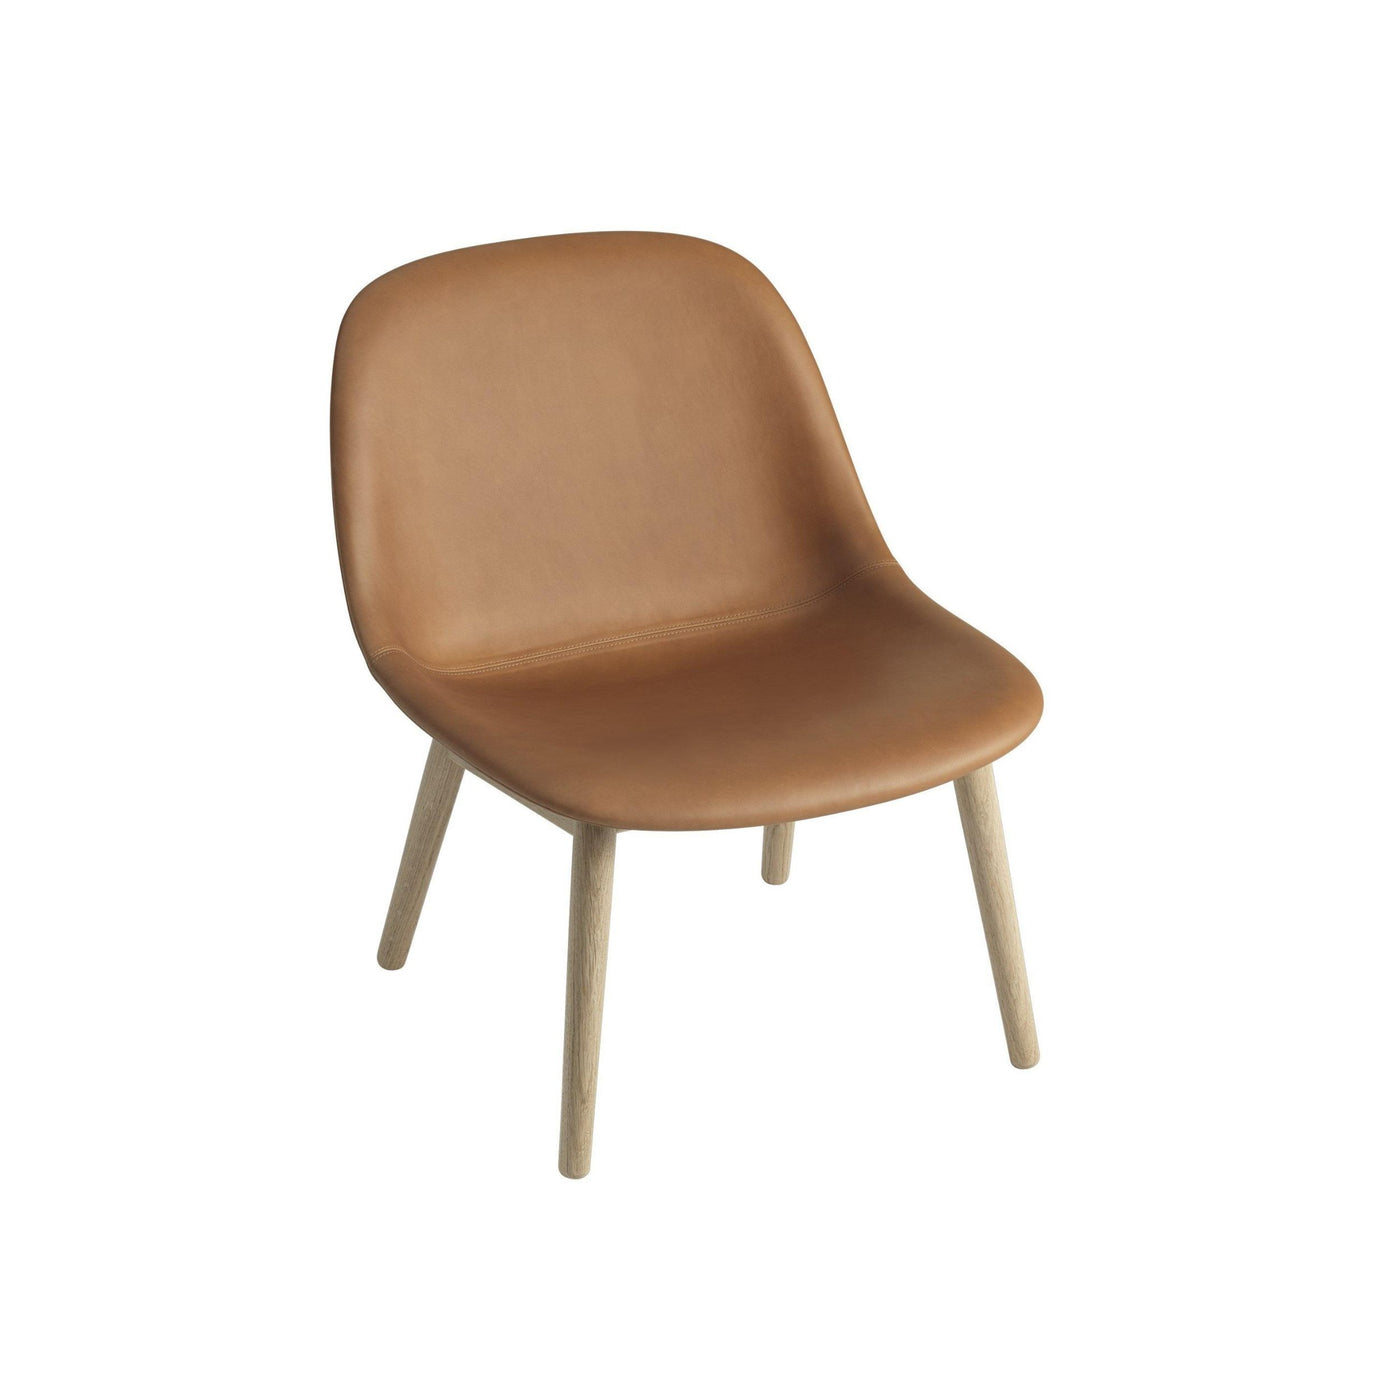 muuto fiber lounge chair wood base cognac refine leather wood base available from someday designs. #colour_cognac-refine-leather